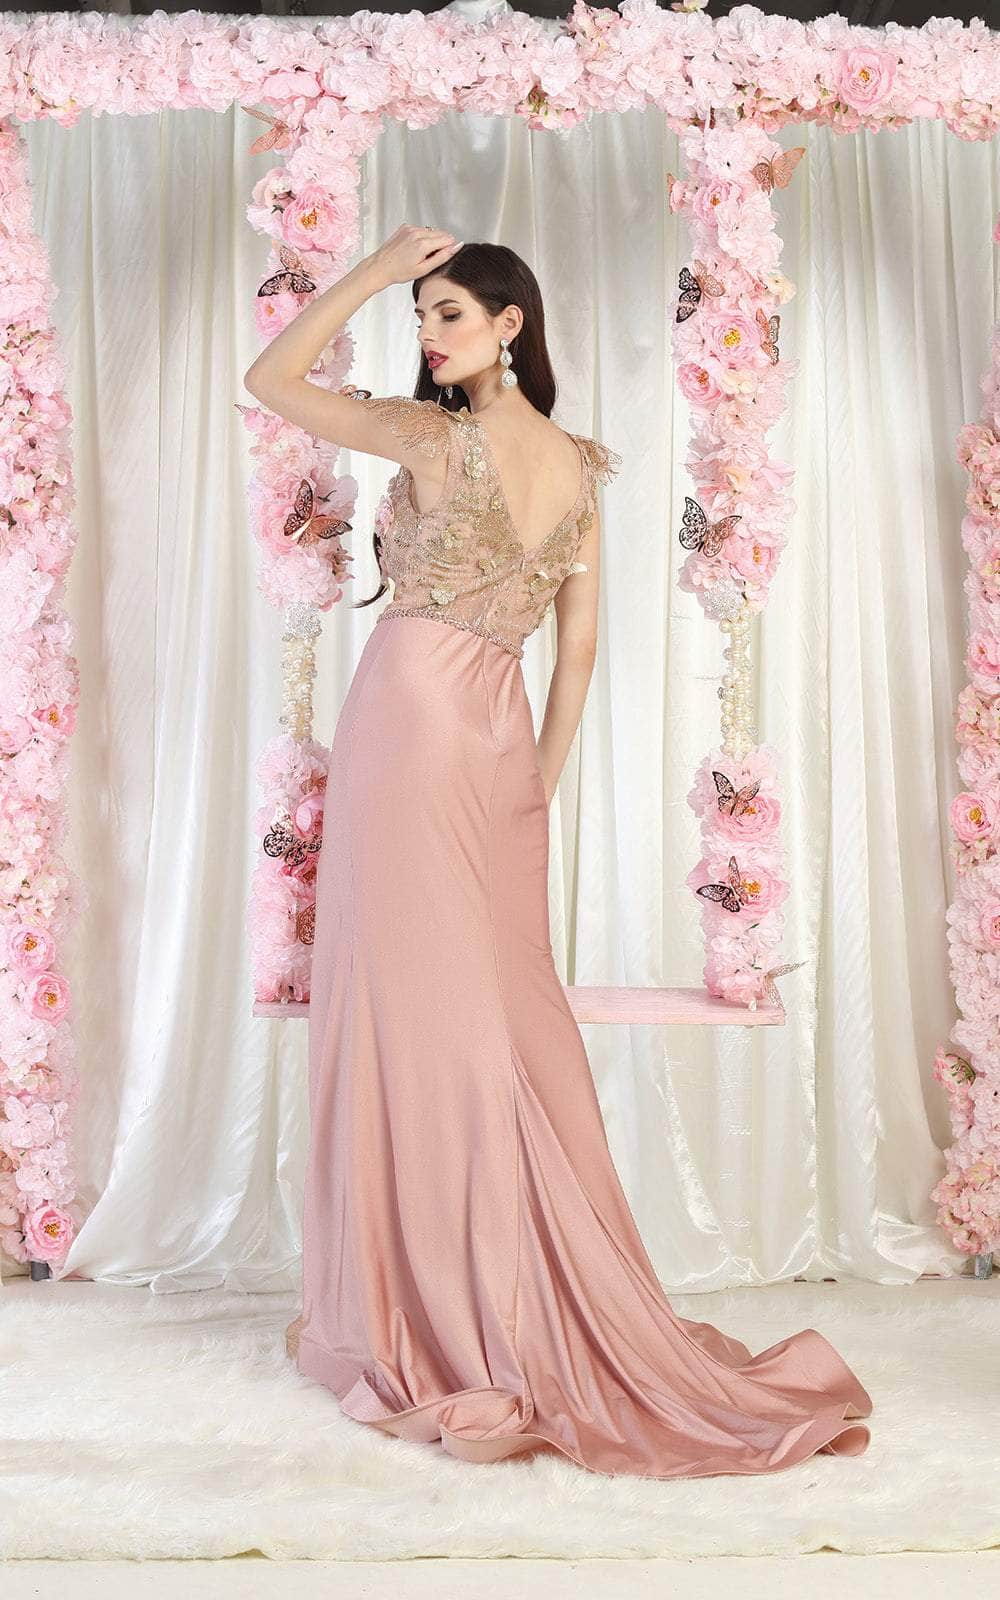 May Queen MQ1981 - 3D Floral V Neck Slit Gown Special Occasion Dress